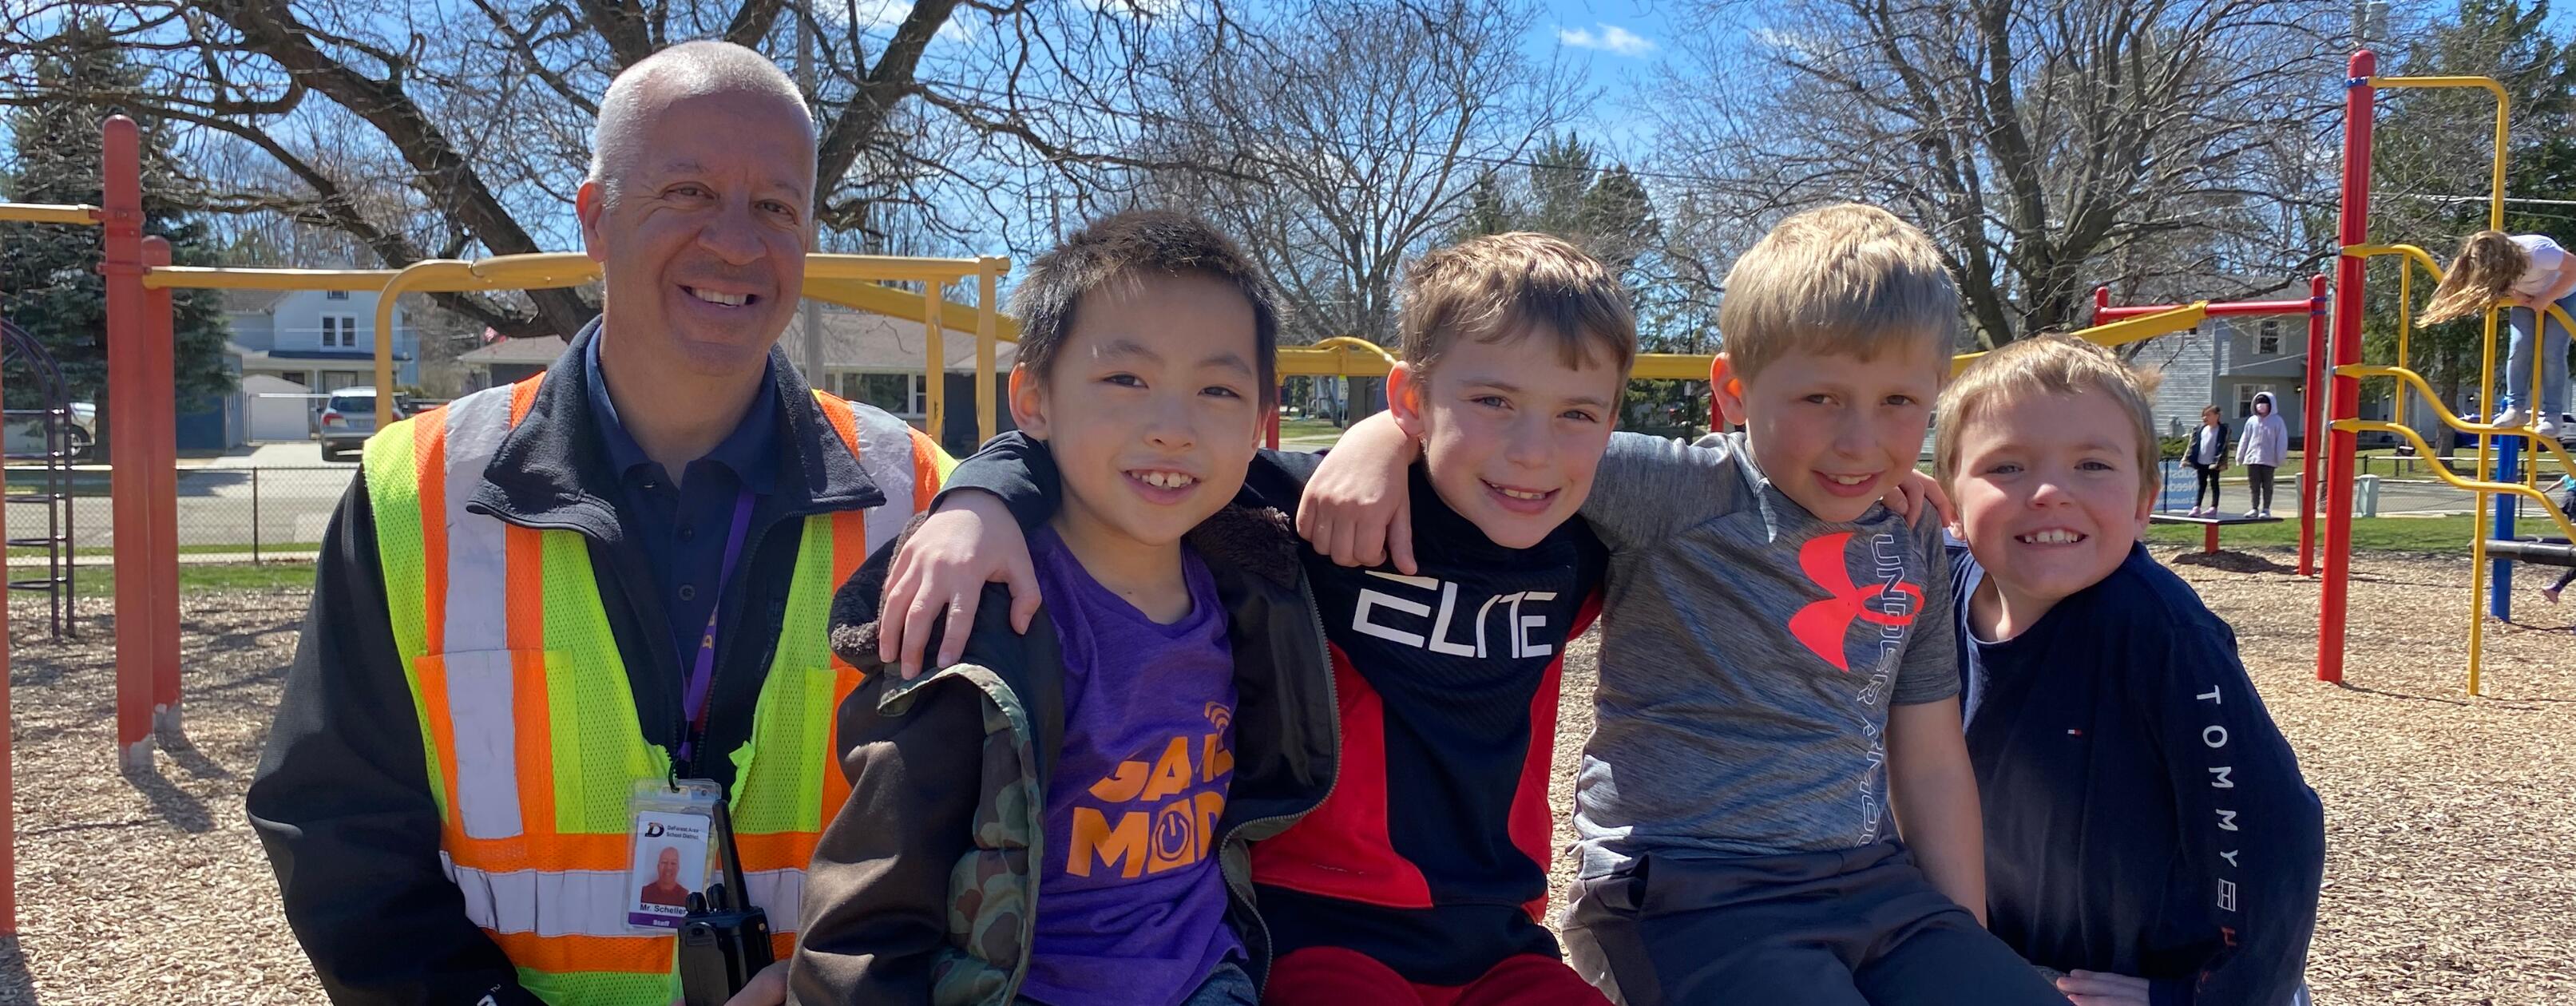 students and staff member outside at recess